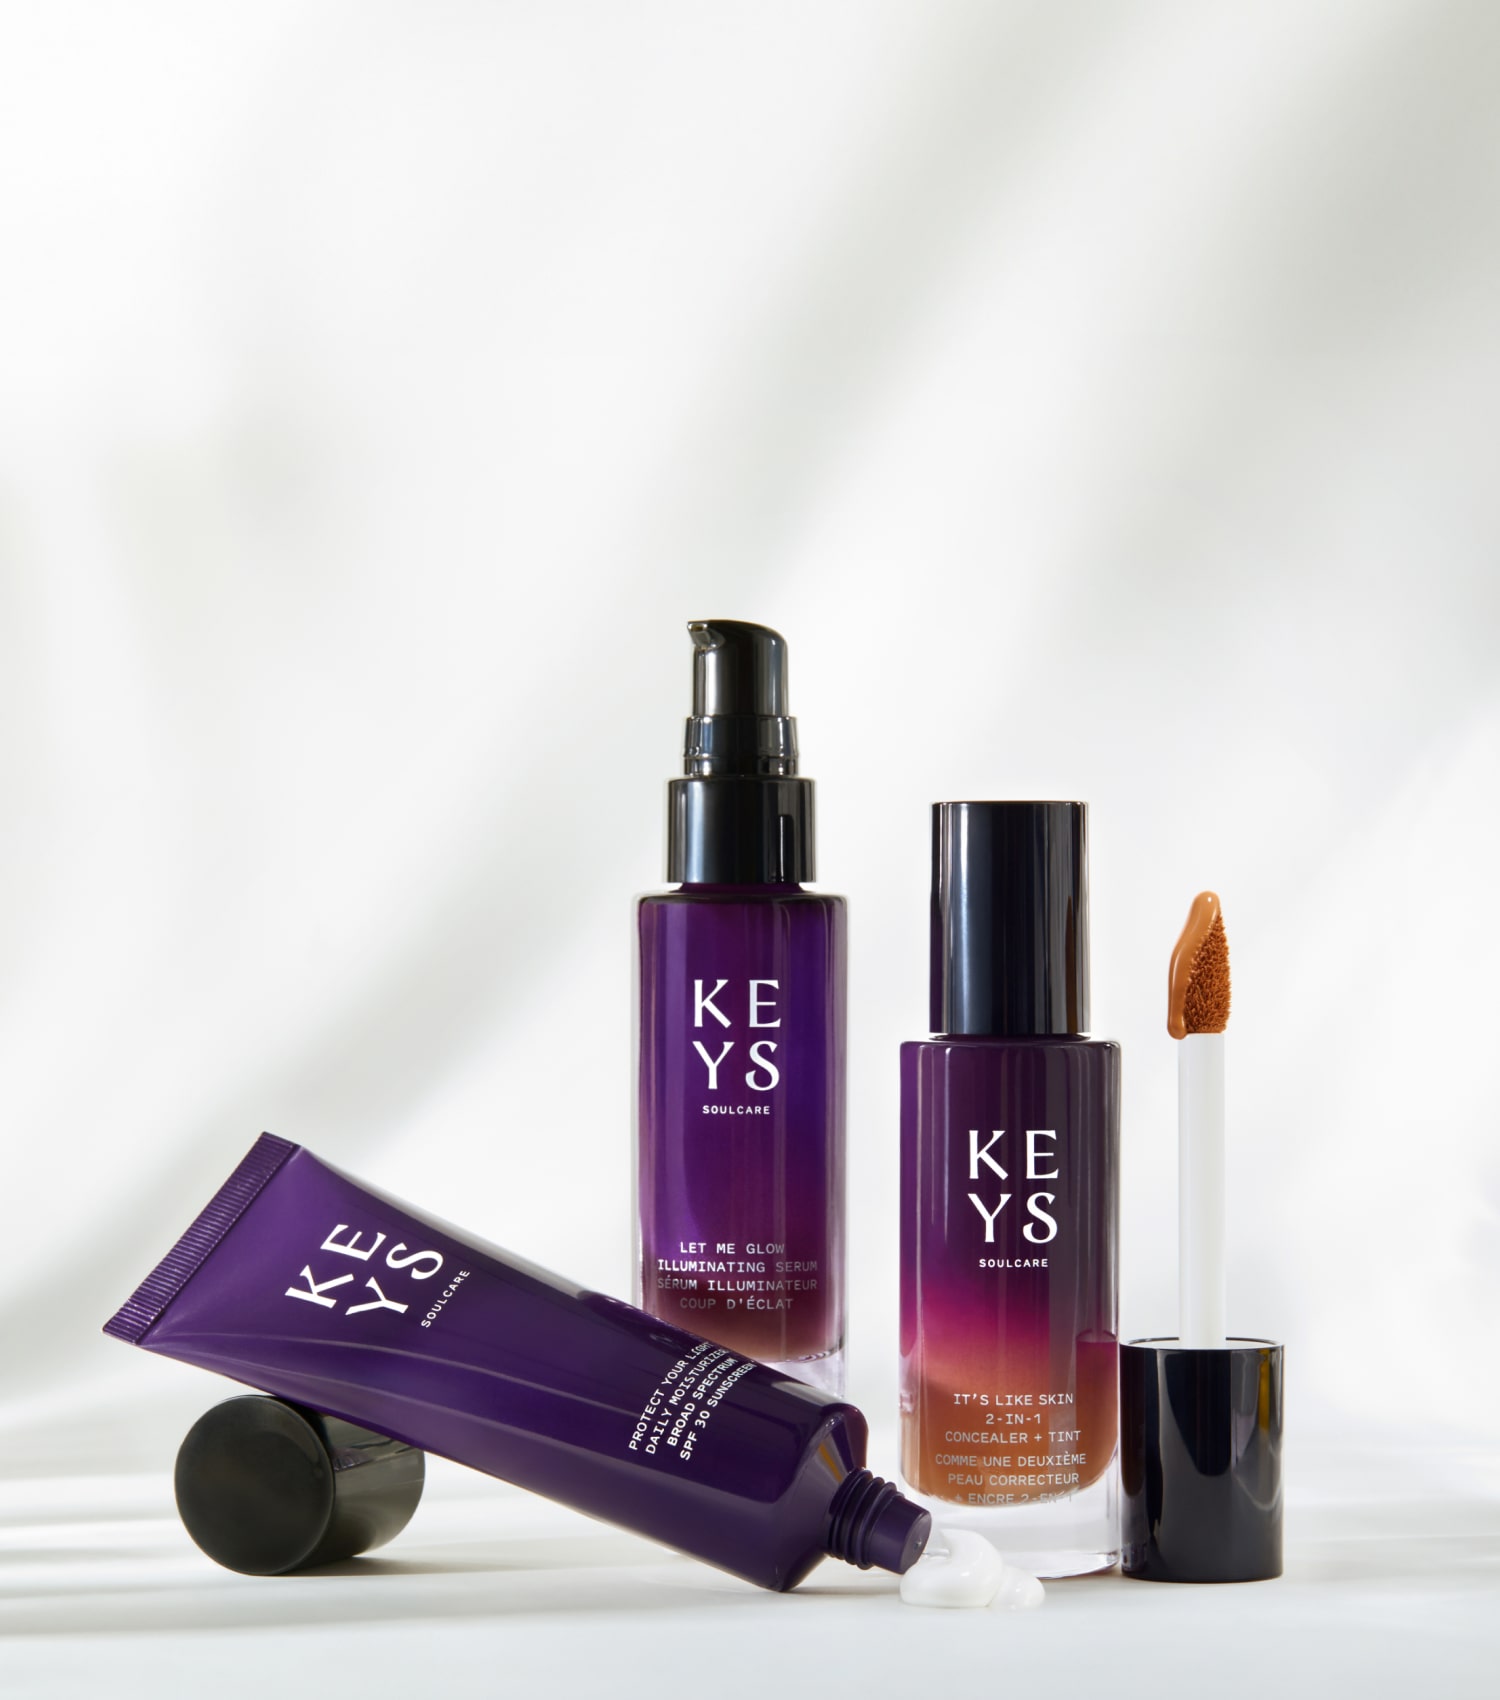 Promotional image featuring a collection of 'KEYS Soulcare' beauty products elegantly arranged against a white backdrop with flowing lines suggesting draped fabric. The assortment includes a purple squeeze tube, a pump bottle, and a concealer with its applicator wand visible, all with the brand's logo in white against the purple packaging. The text 'SHOP ALL' is prominent on the right side, in large uppercase letters, followed by the invitation 'Explore skincare, makeup, and body care rituals, created by Alicia Keys.